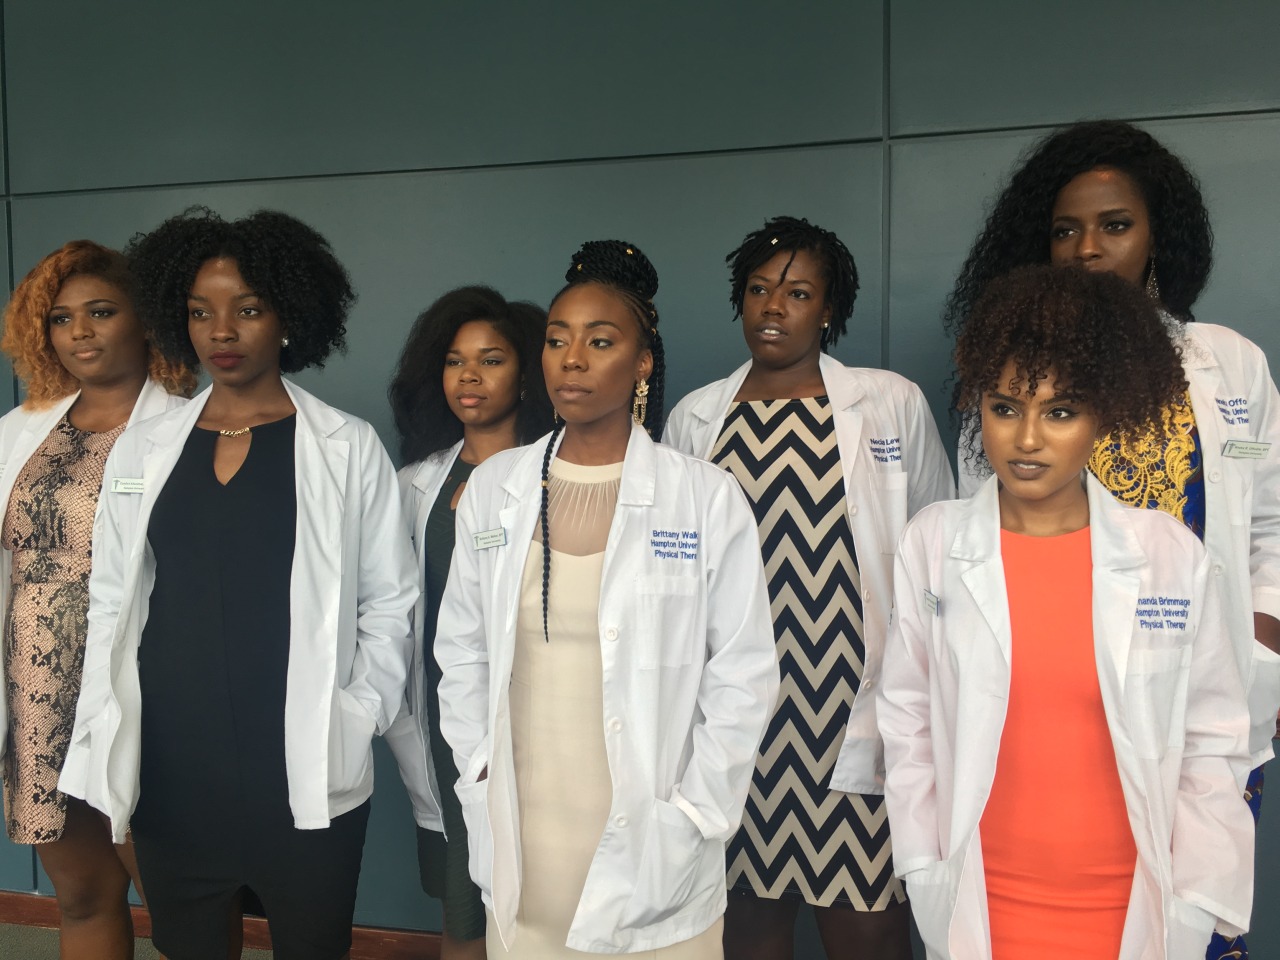 themindoflove: Hampton University Doctor of Physical Therapy Students ✨